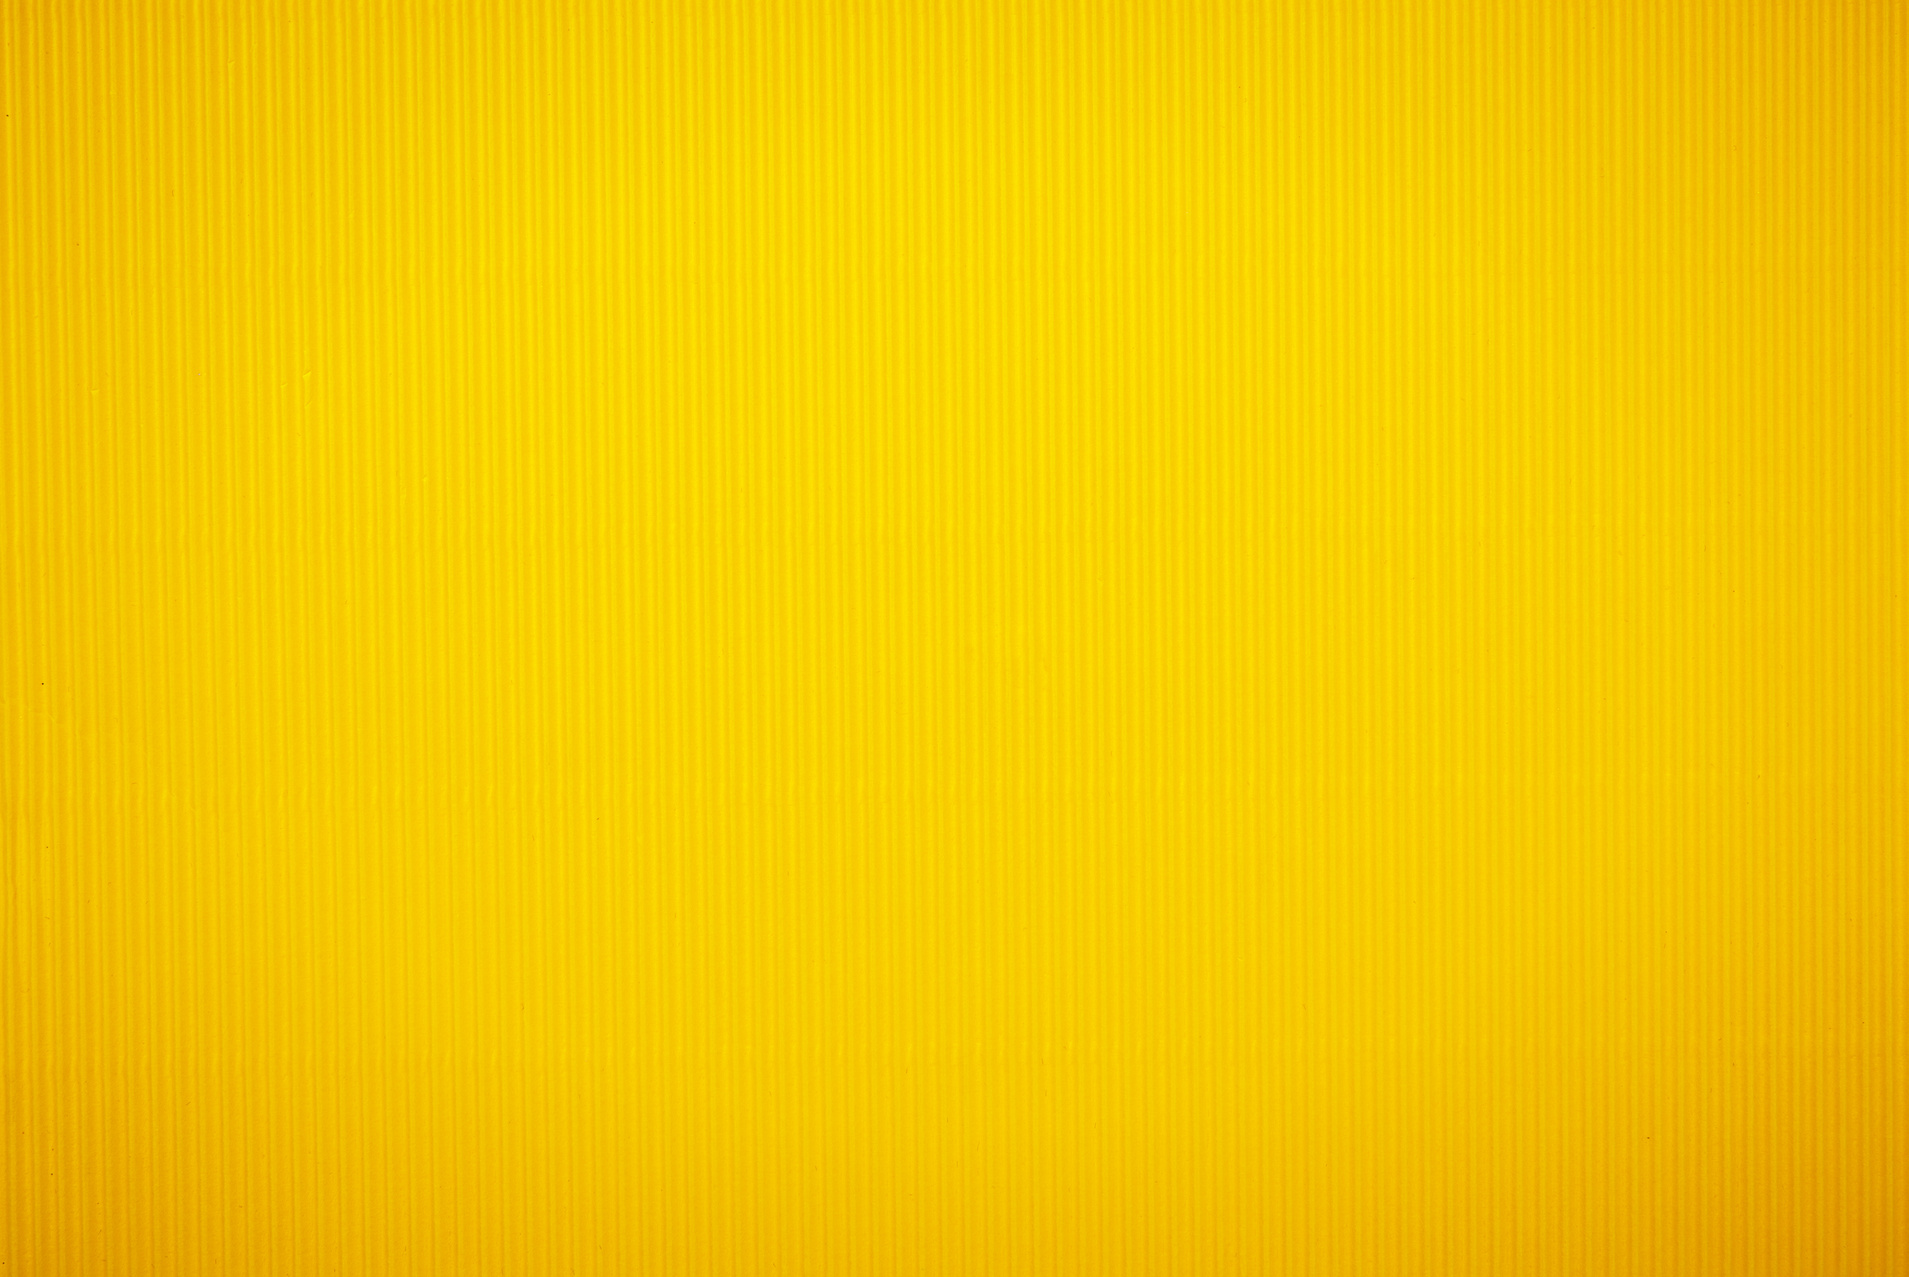 Background of bright yellow striped paper